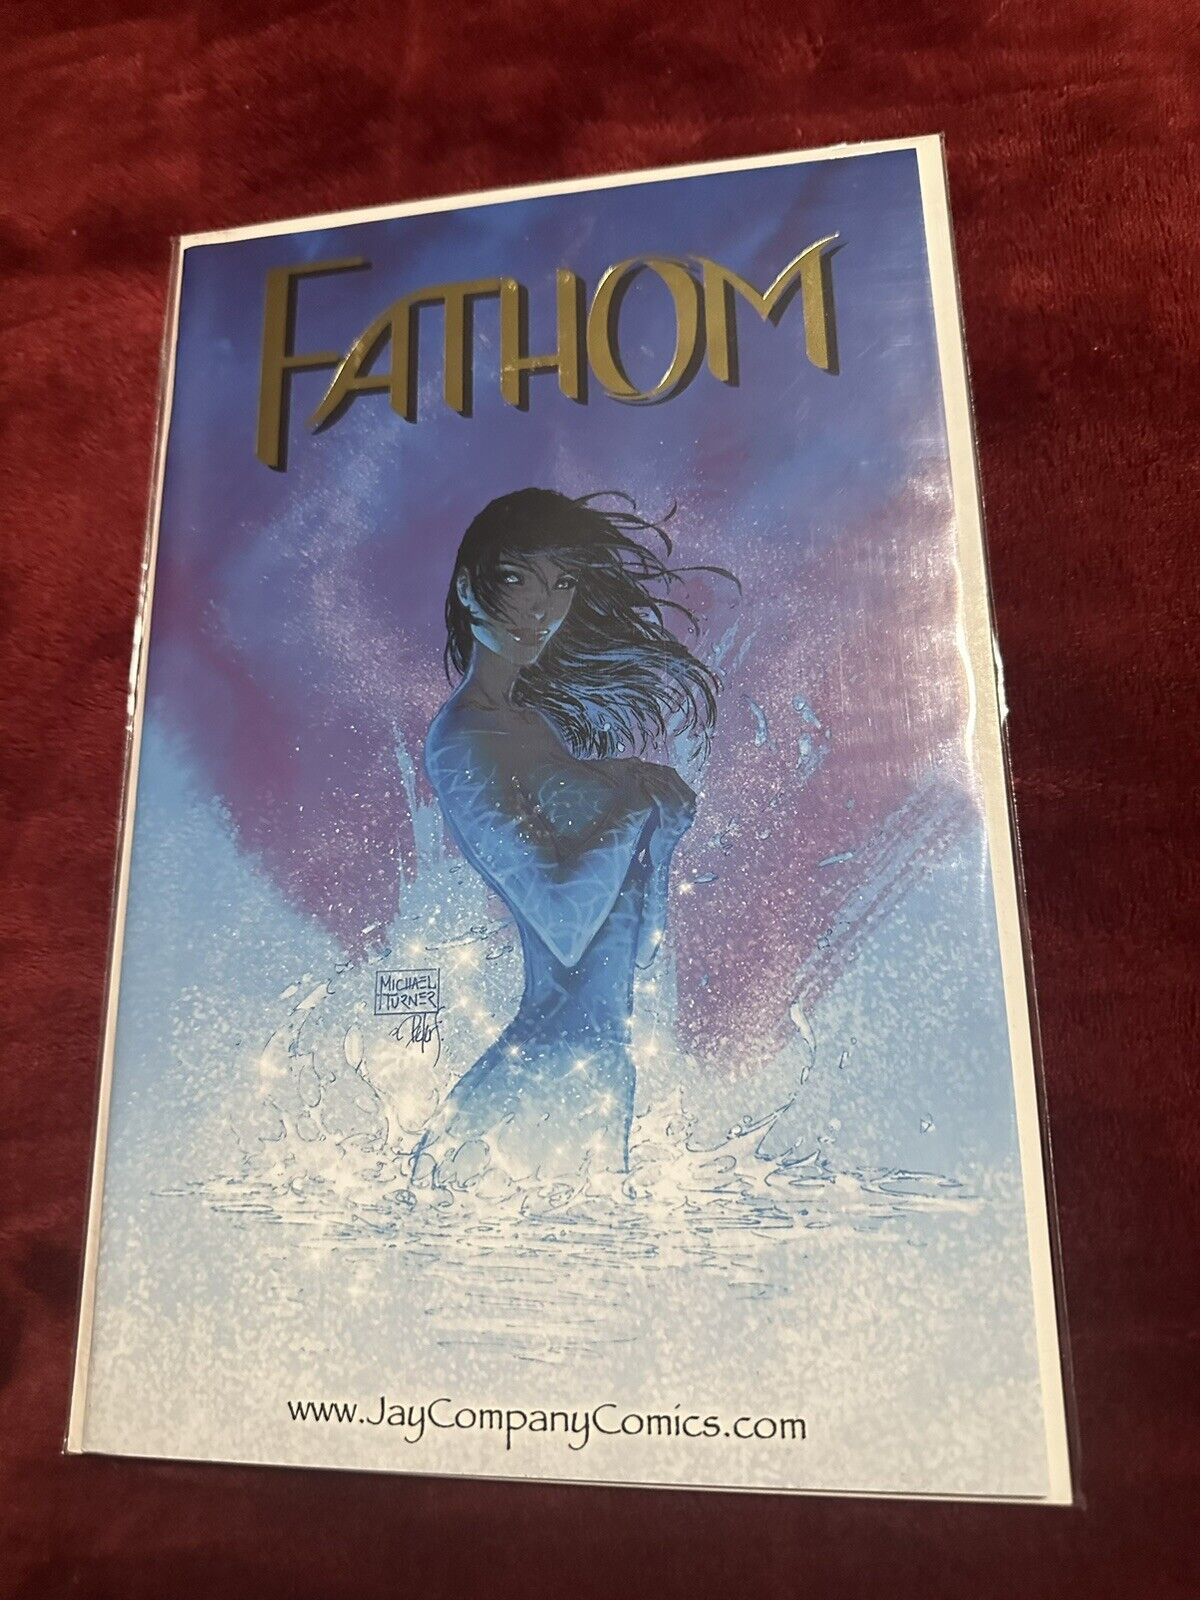 **FATHOM SWIMSUIT SPECIAL# 1 (500) LIMITED COMIC CON EDITION JAY COMPANY NM**